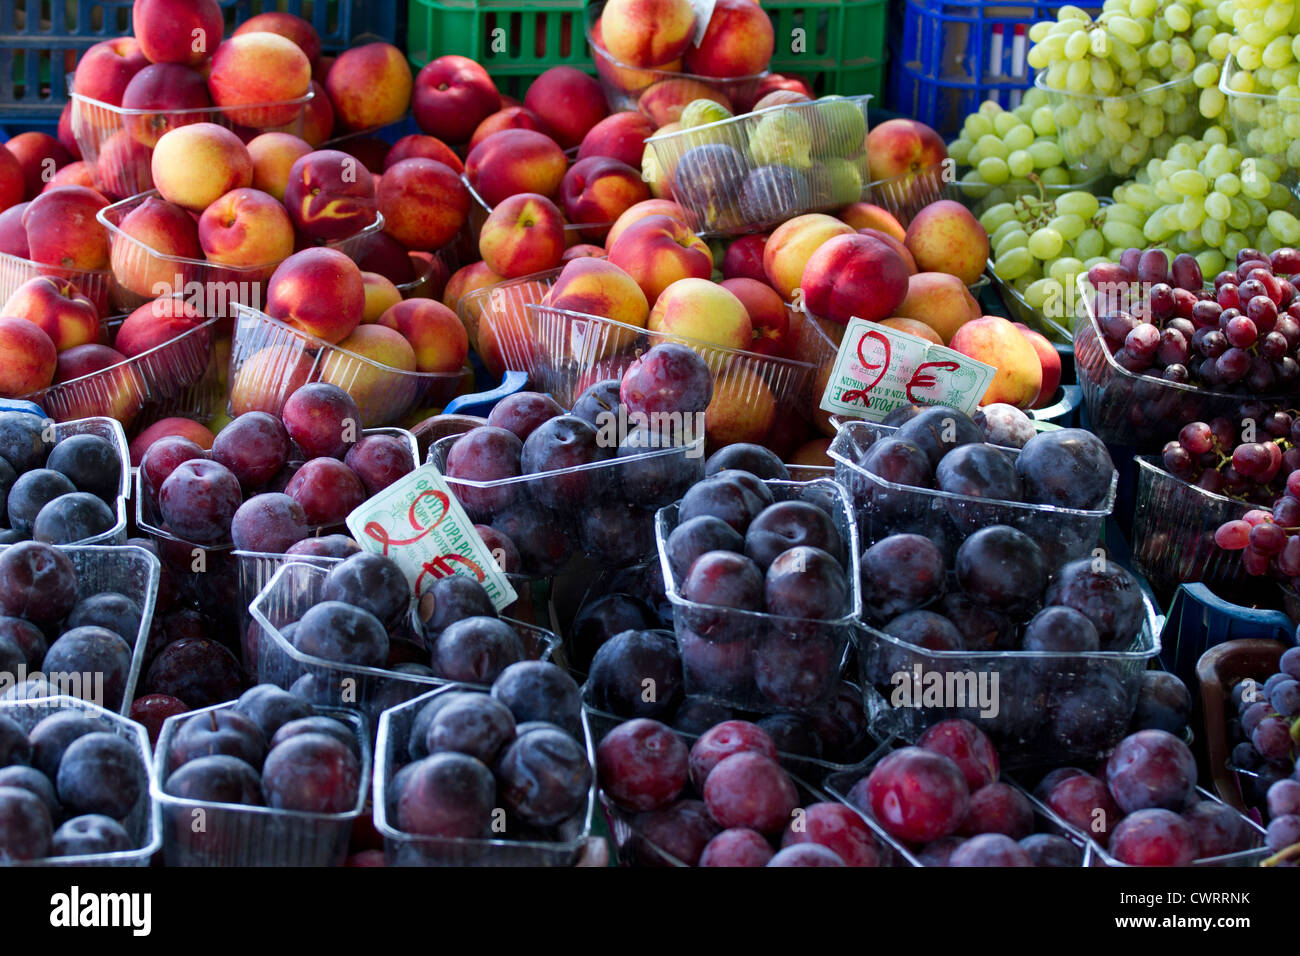 Picked and sorted fruits for sale in the Island of  Rhodes Town displaying prices in euros Aegean, Mediterranean. Stock Photo